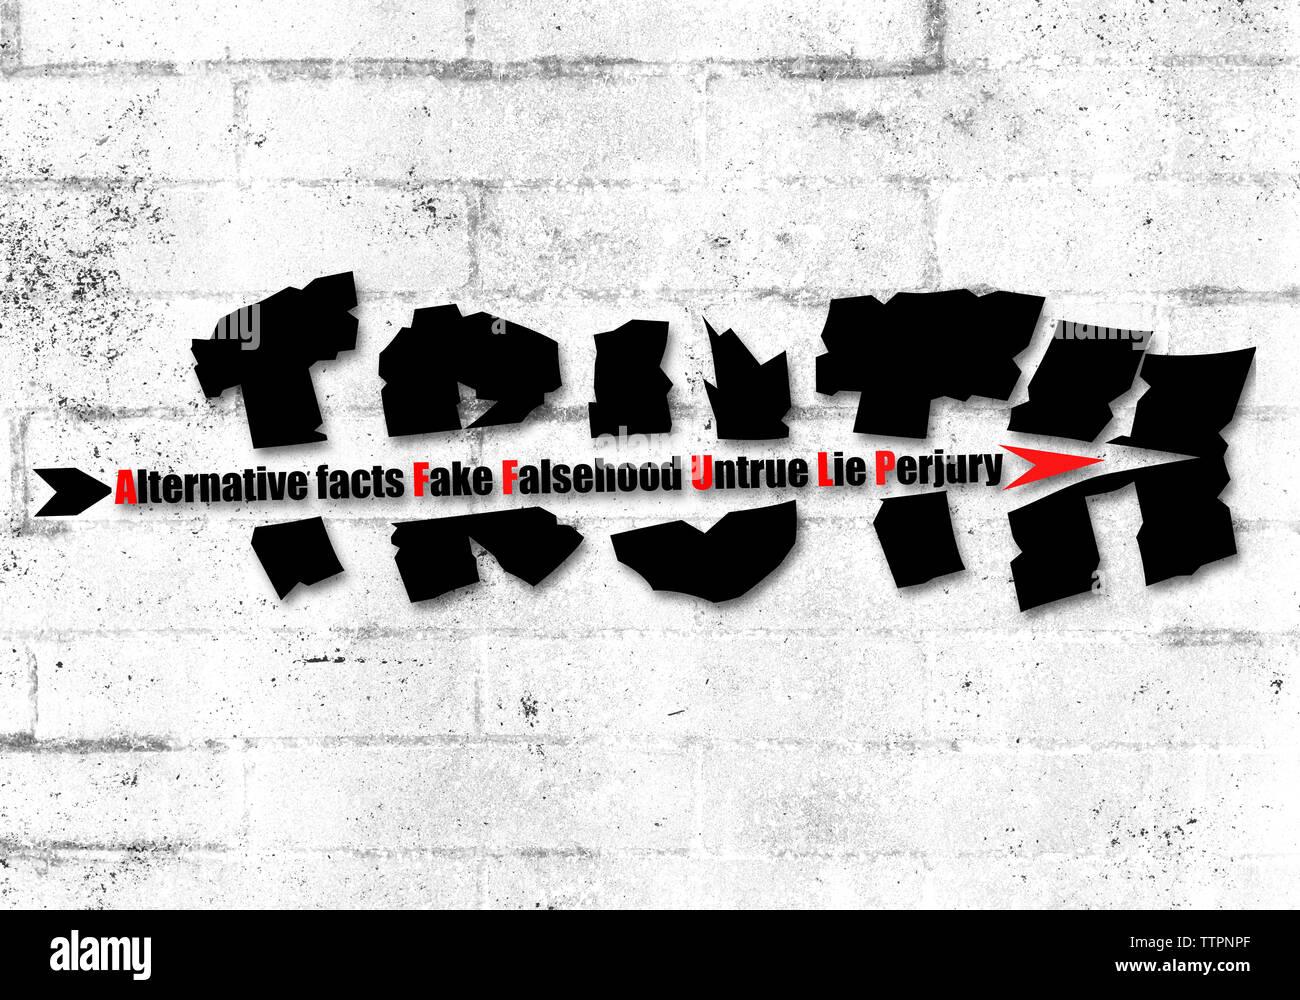 Concept illustration an arrow of Alternative facts, Fake, Falsehood, untrue, lie and perjury shattering Truth text paint old wall background Stock Photo